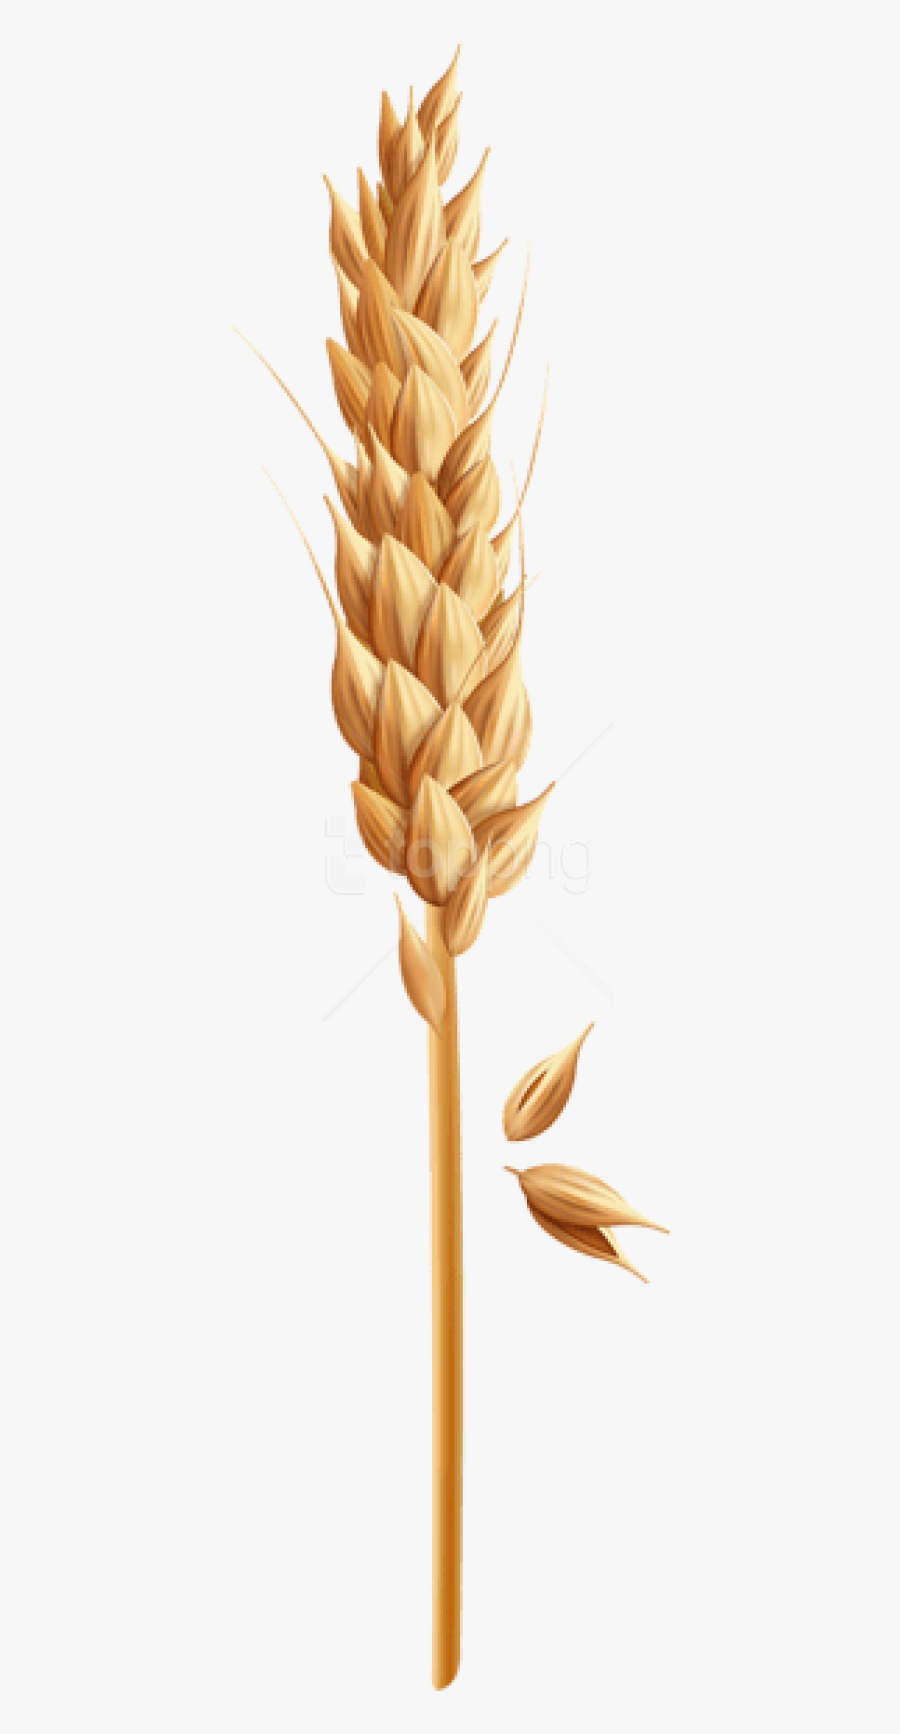 Download Png Photo Toppng - Clip Art Wheat Grain, Transparent Clipart